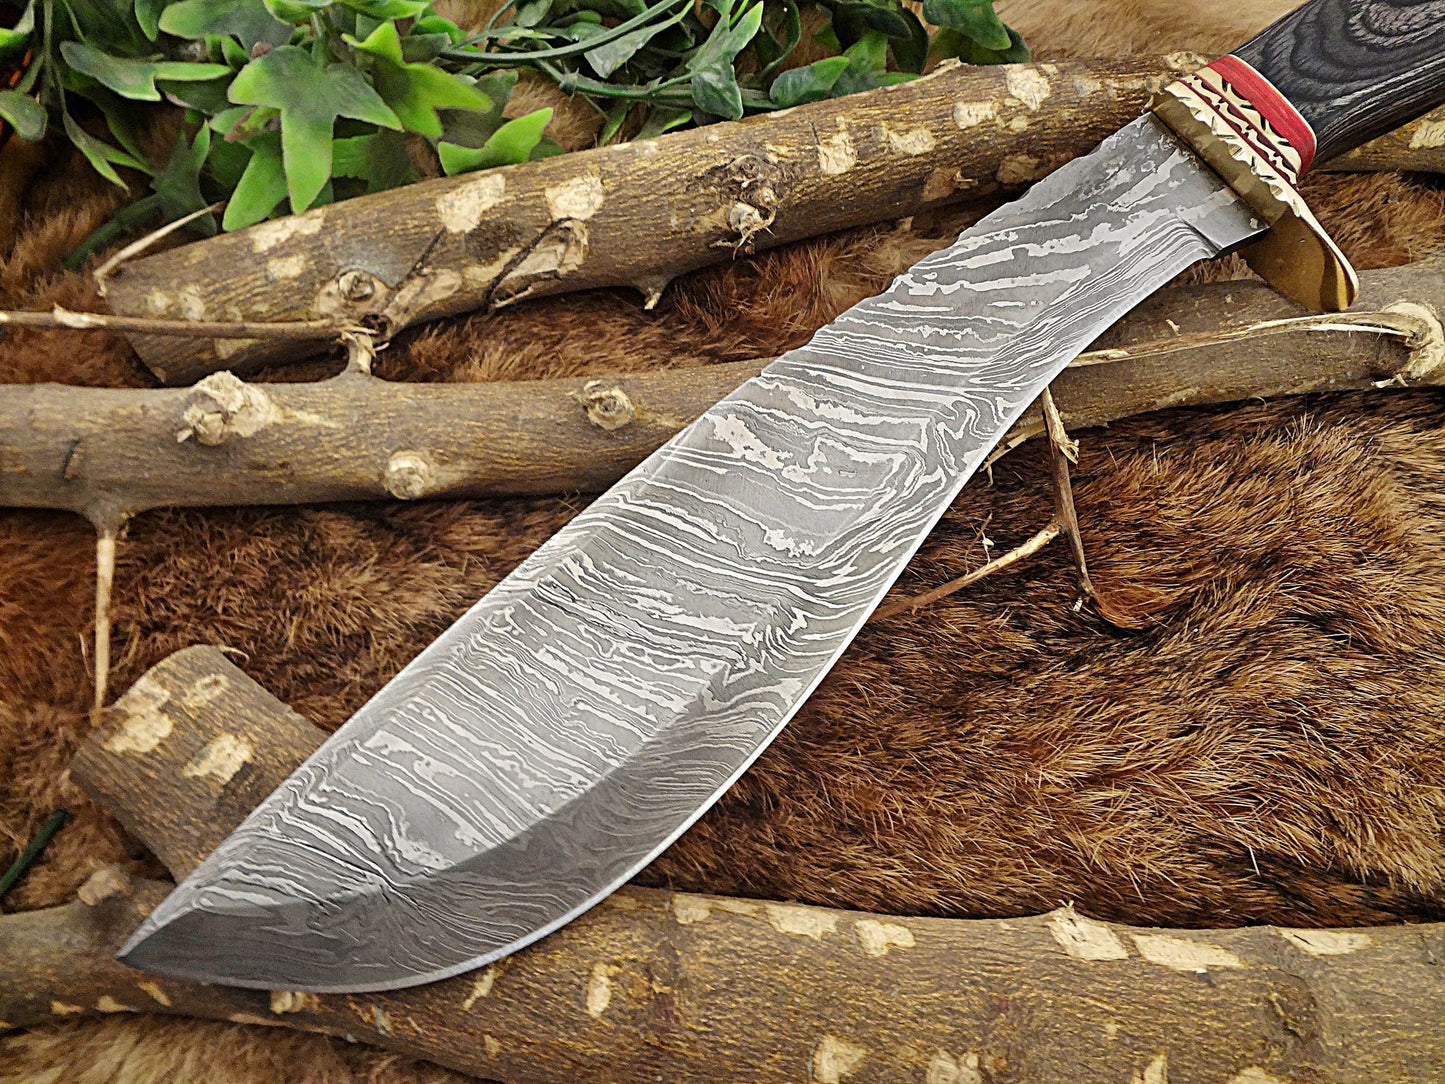 Damascus Steel Kukri Knife 15 Inches custom made Hand Forged With 10" long blade, Bull horn with engraved brass scale, Cow Leather Sheath